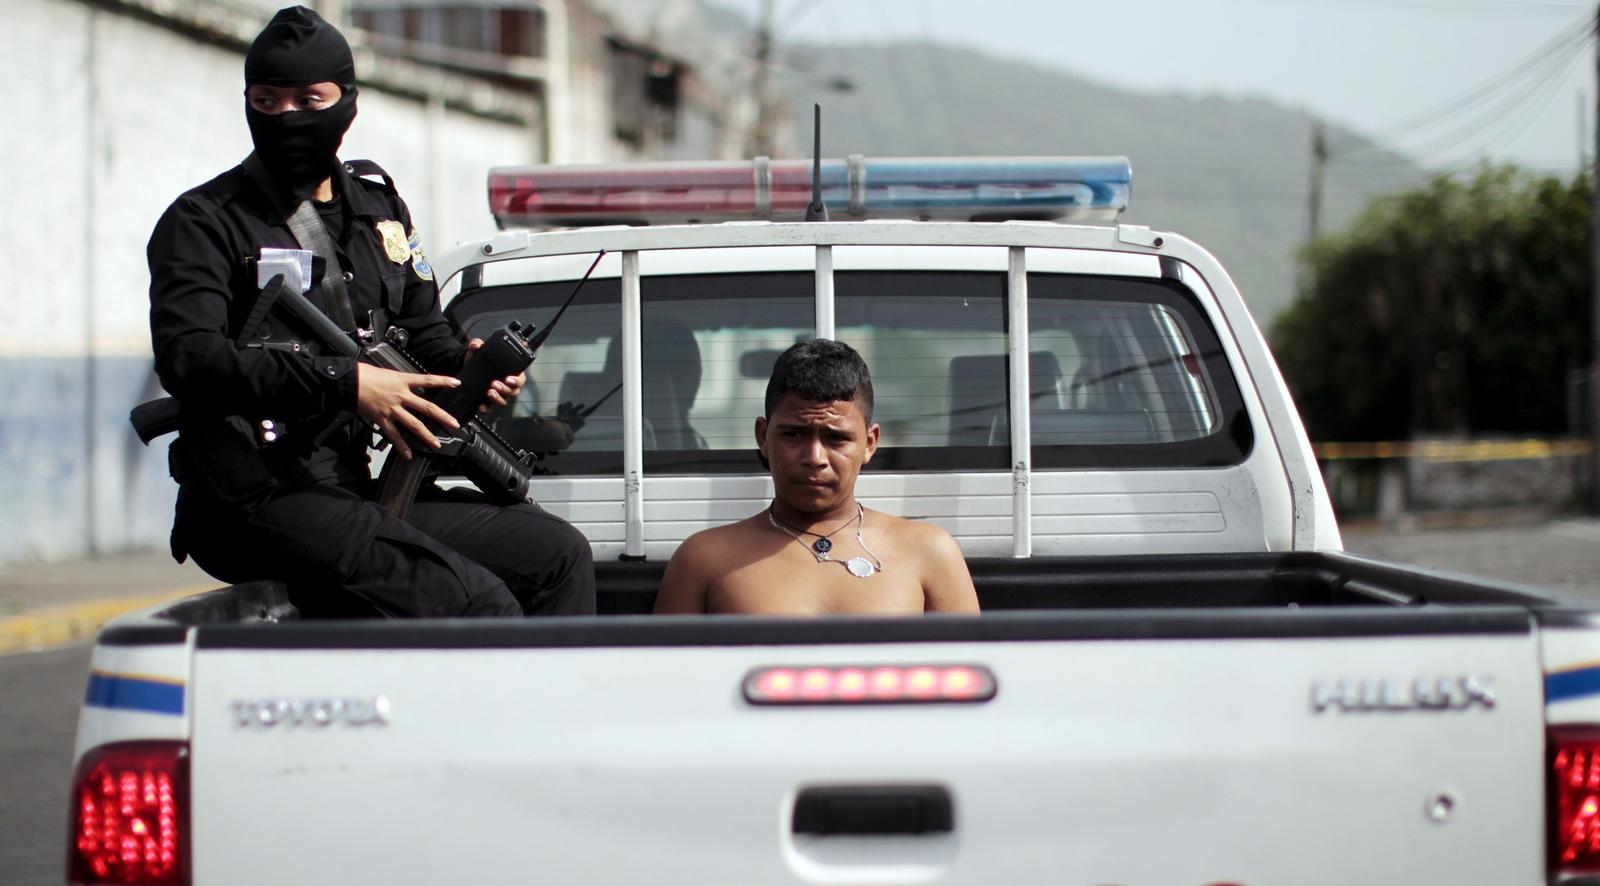 Policewoman in black mask with gun detains shirtless youth sitting in back of police pick-up truck.